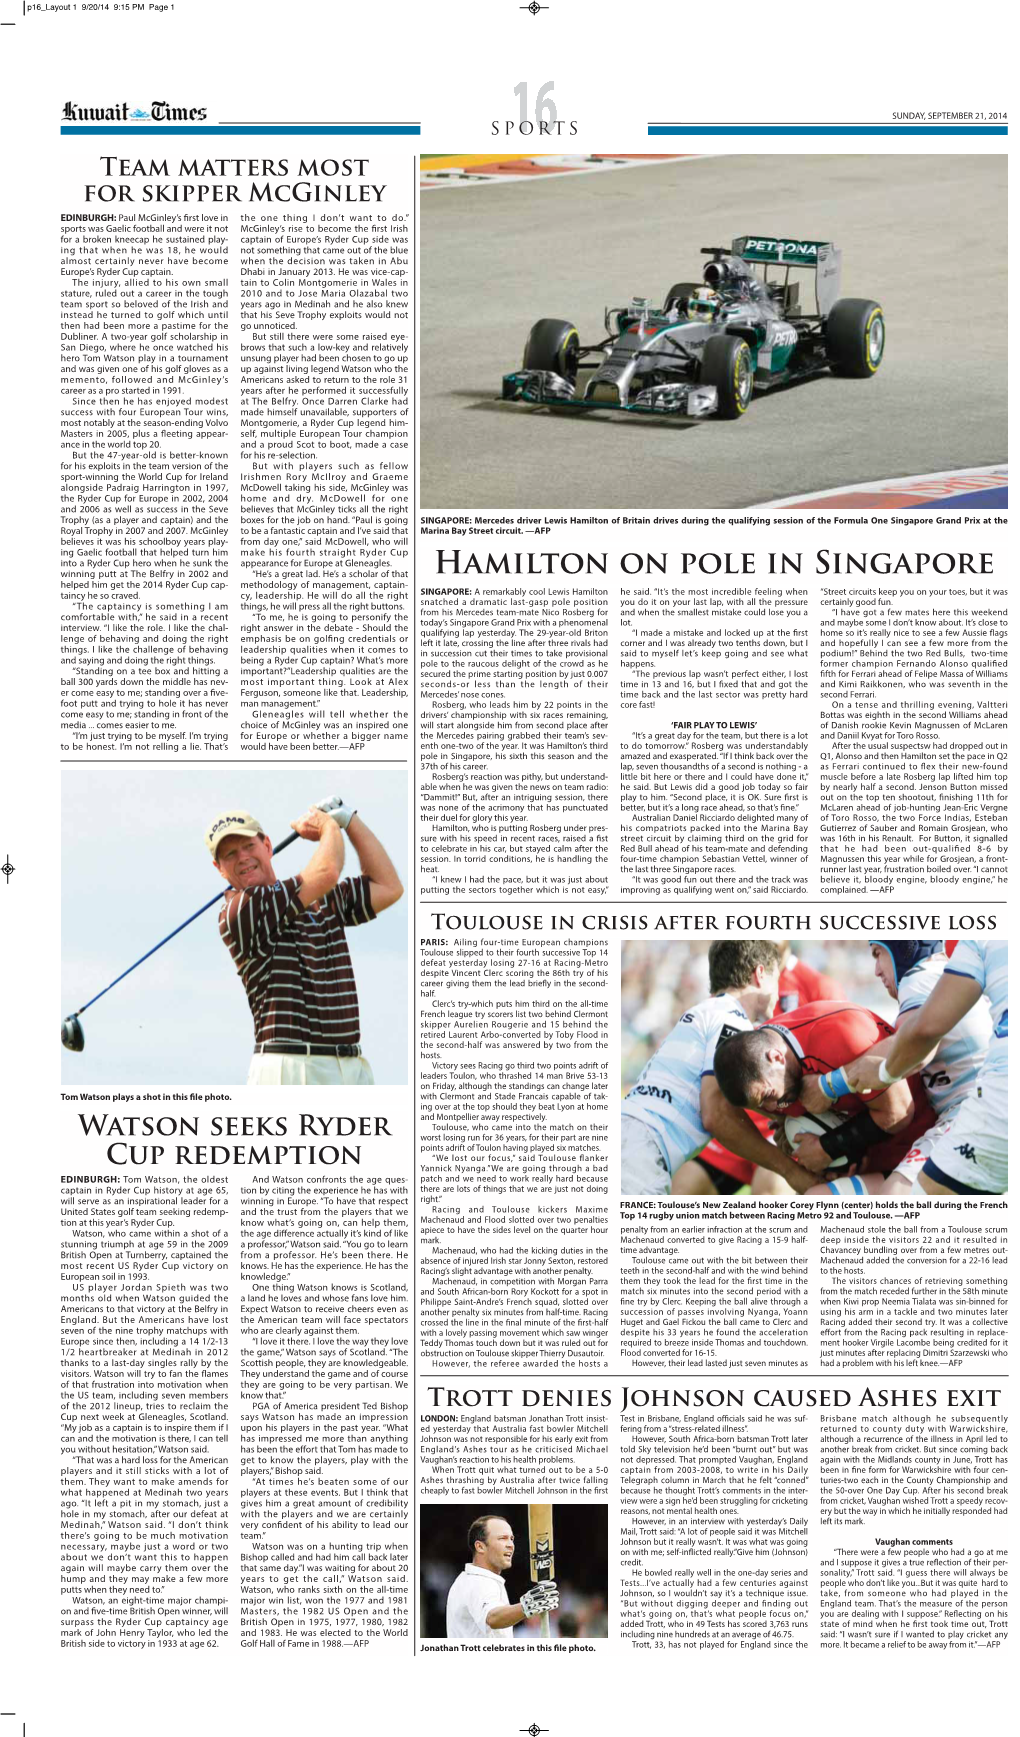 Hamilton on Pole in Singapore Winning Putt at the Belfry in 2002 and “He’S a Great Lad